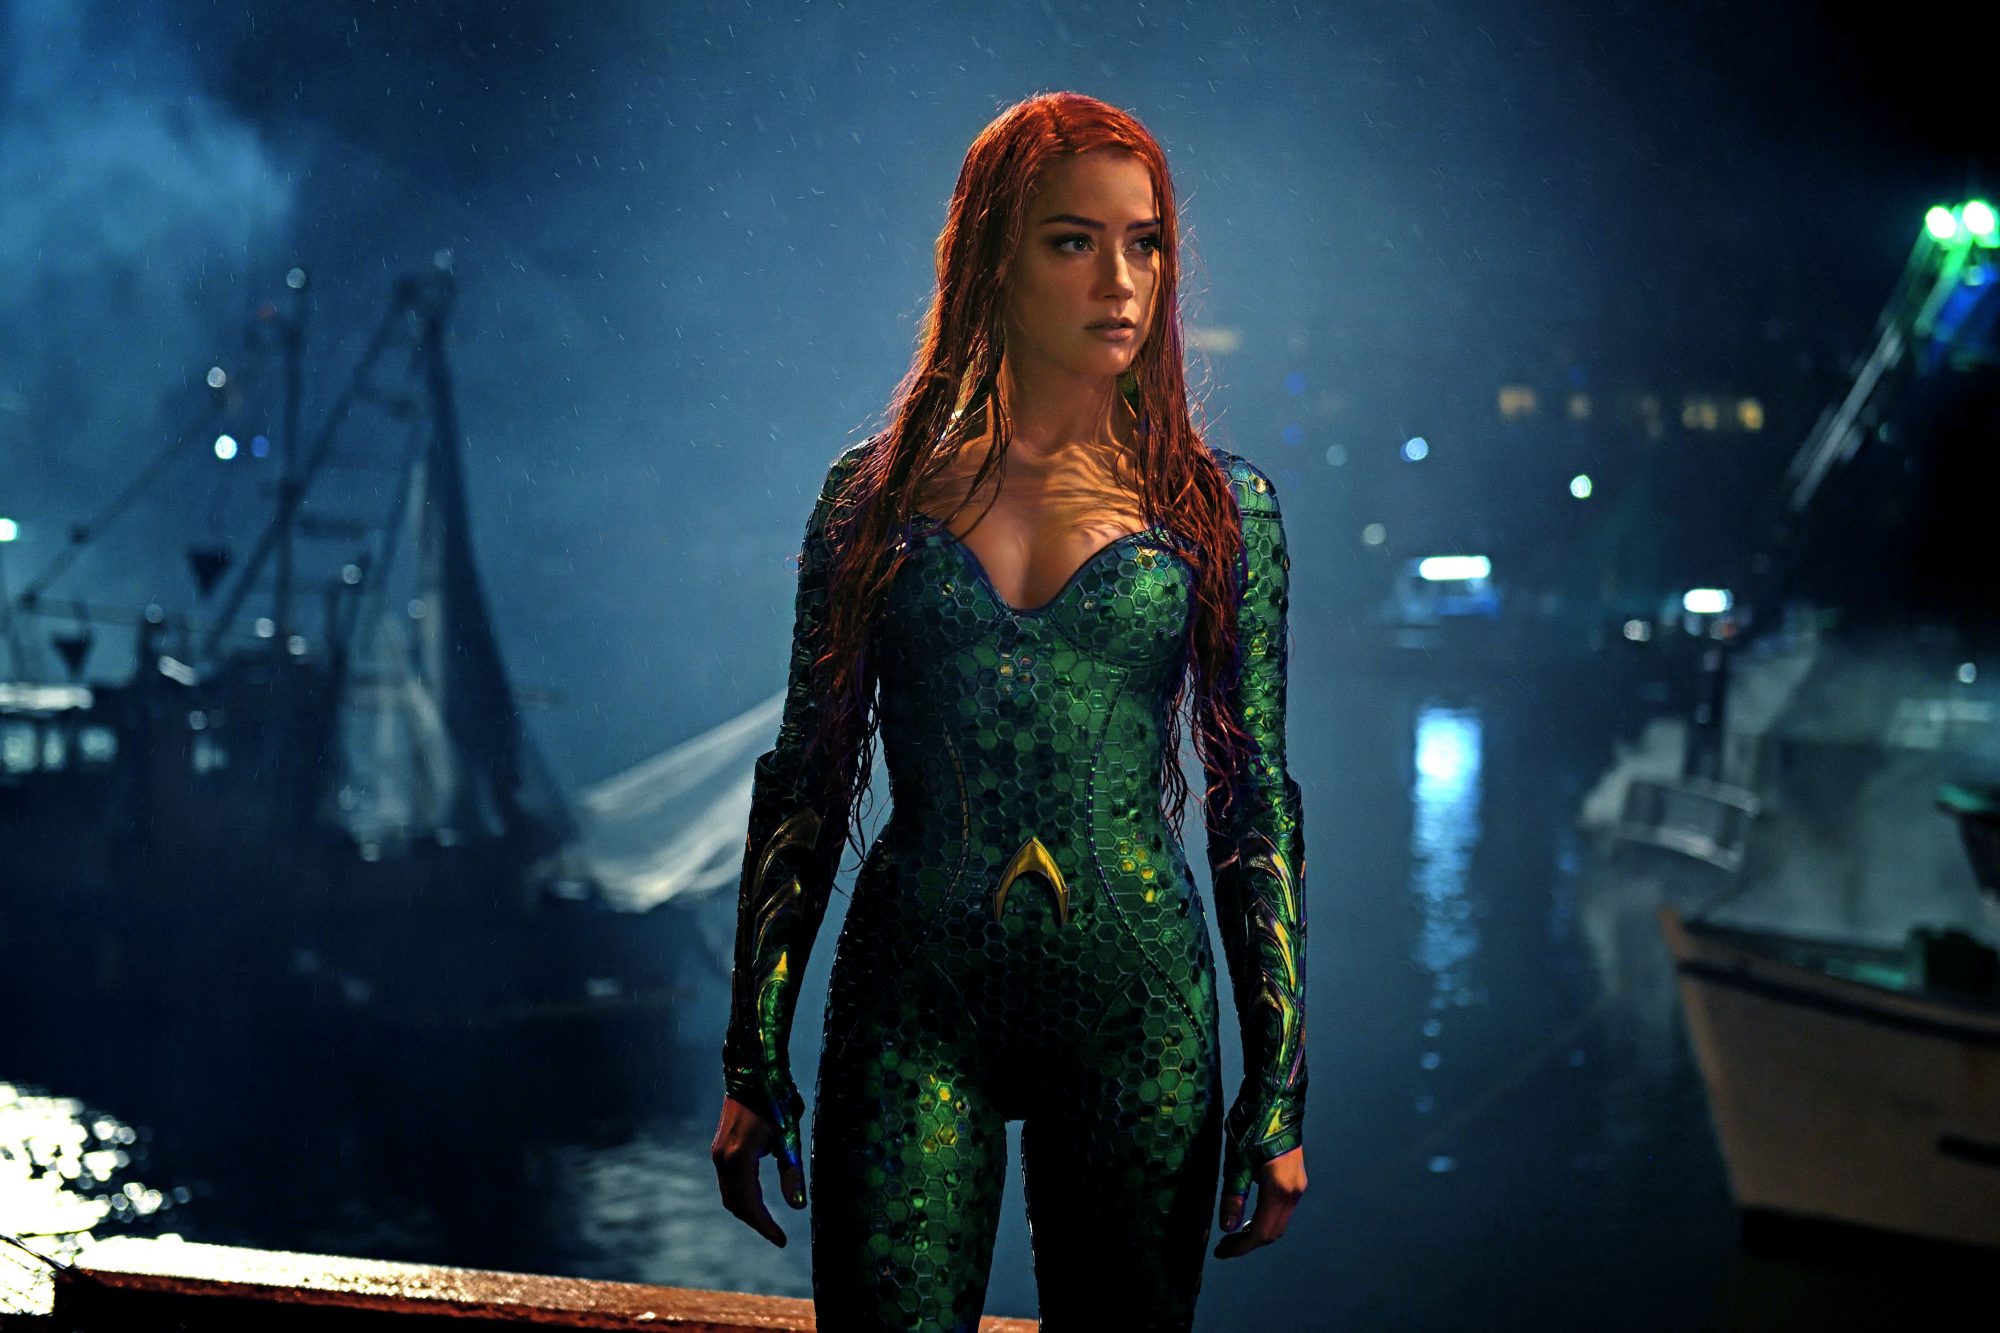 Amber Heard's Mera Will Have Blonde Hair in Aquaman 2 - wide 6